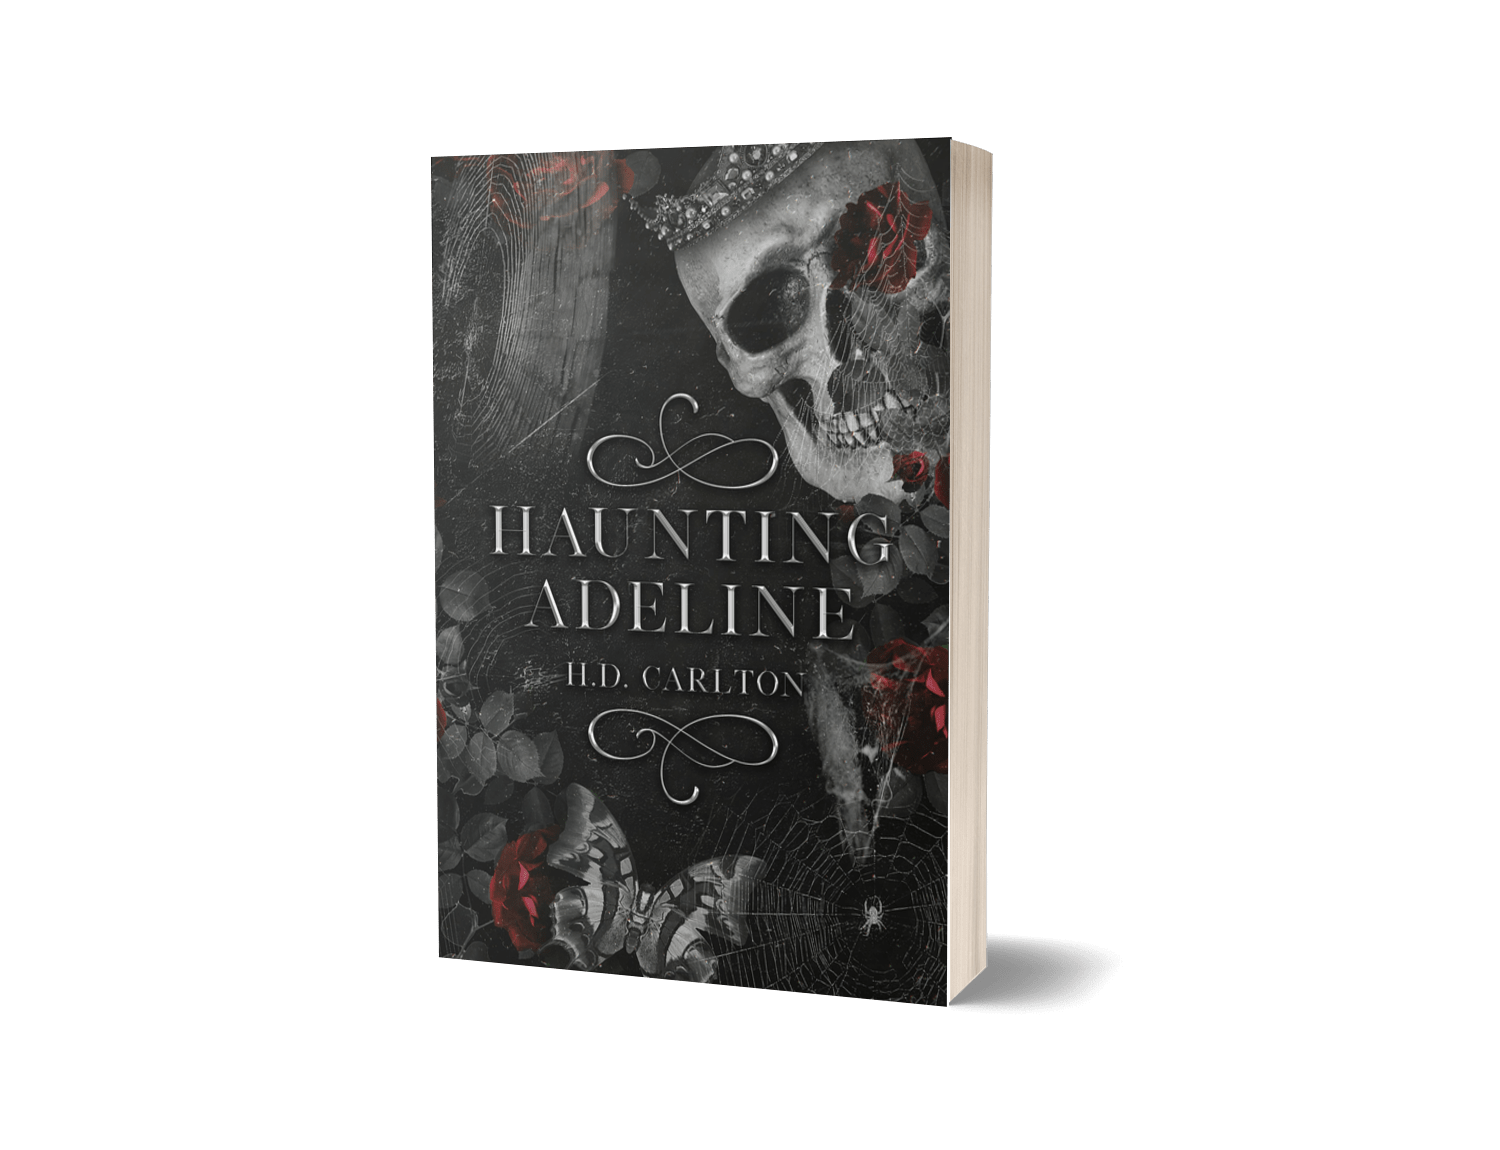 Haunting Adeline by H. D. Carlton